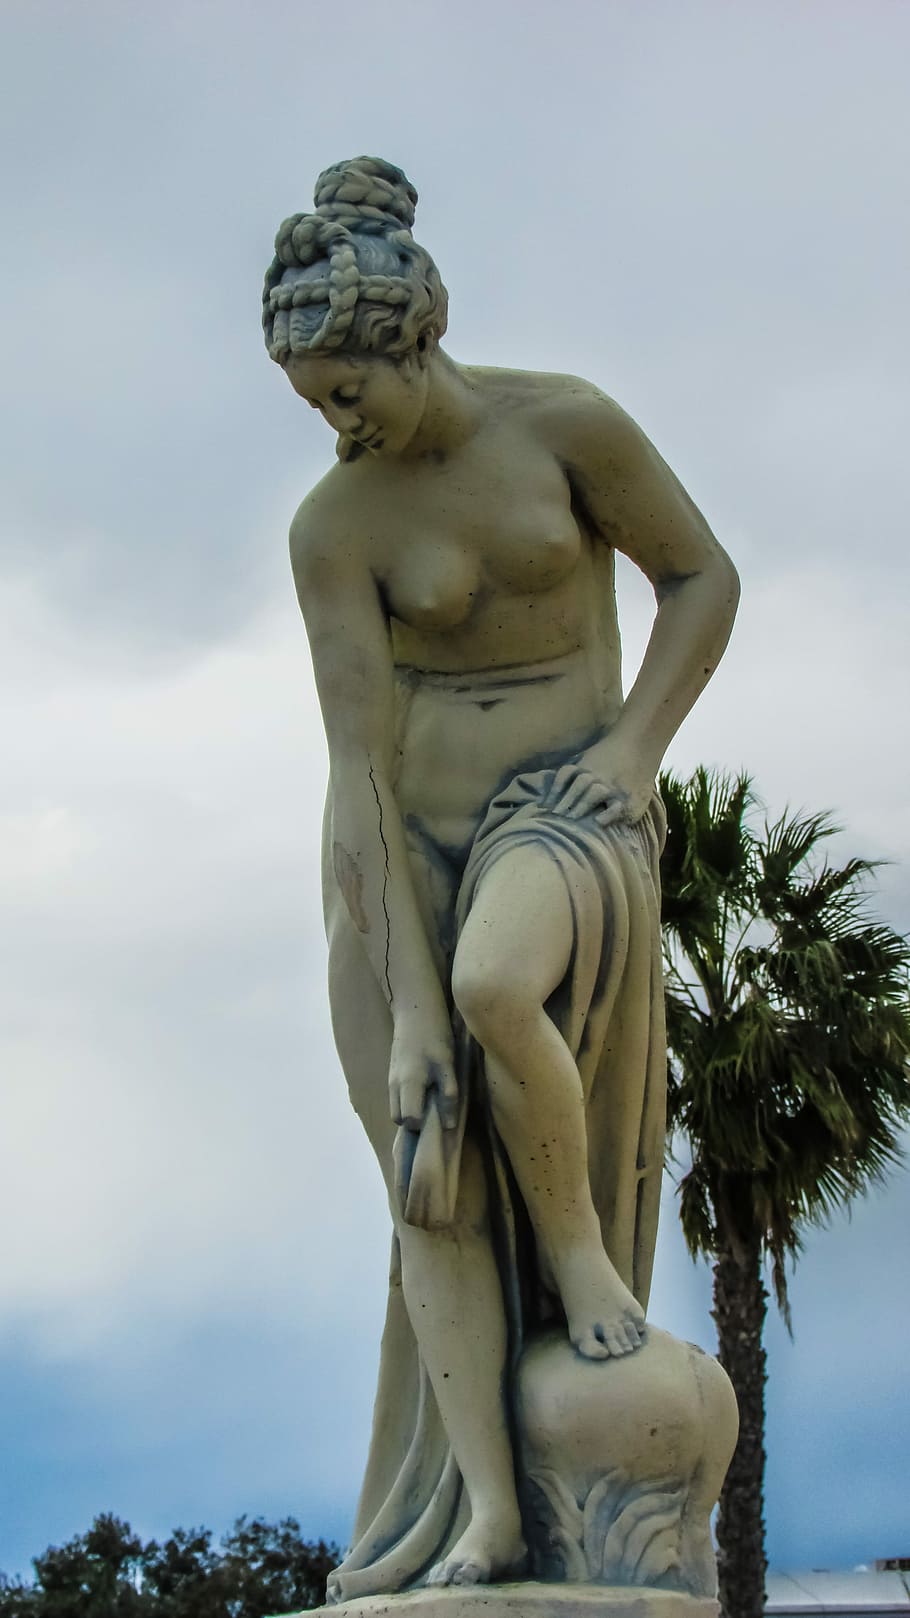 Cyprus, Ayia Napa, Water World, aphrodite, statue, sculpture, human representation, male likeness, monument, marble